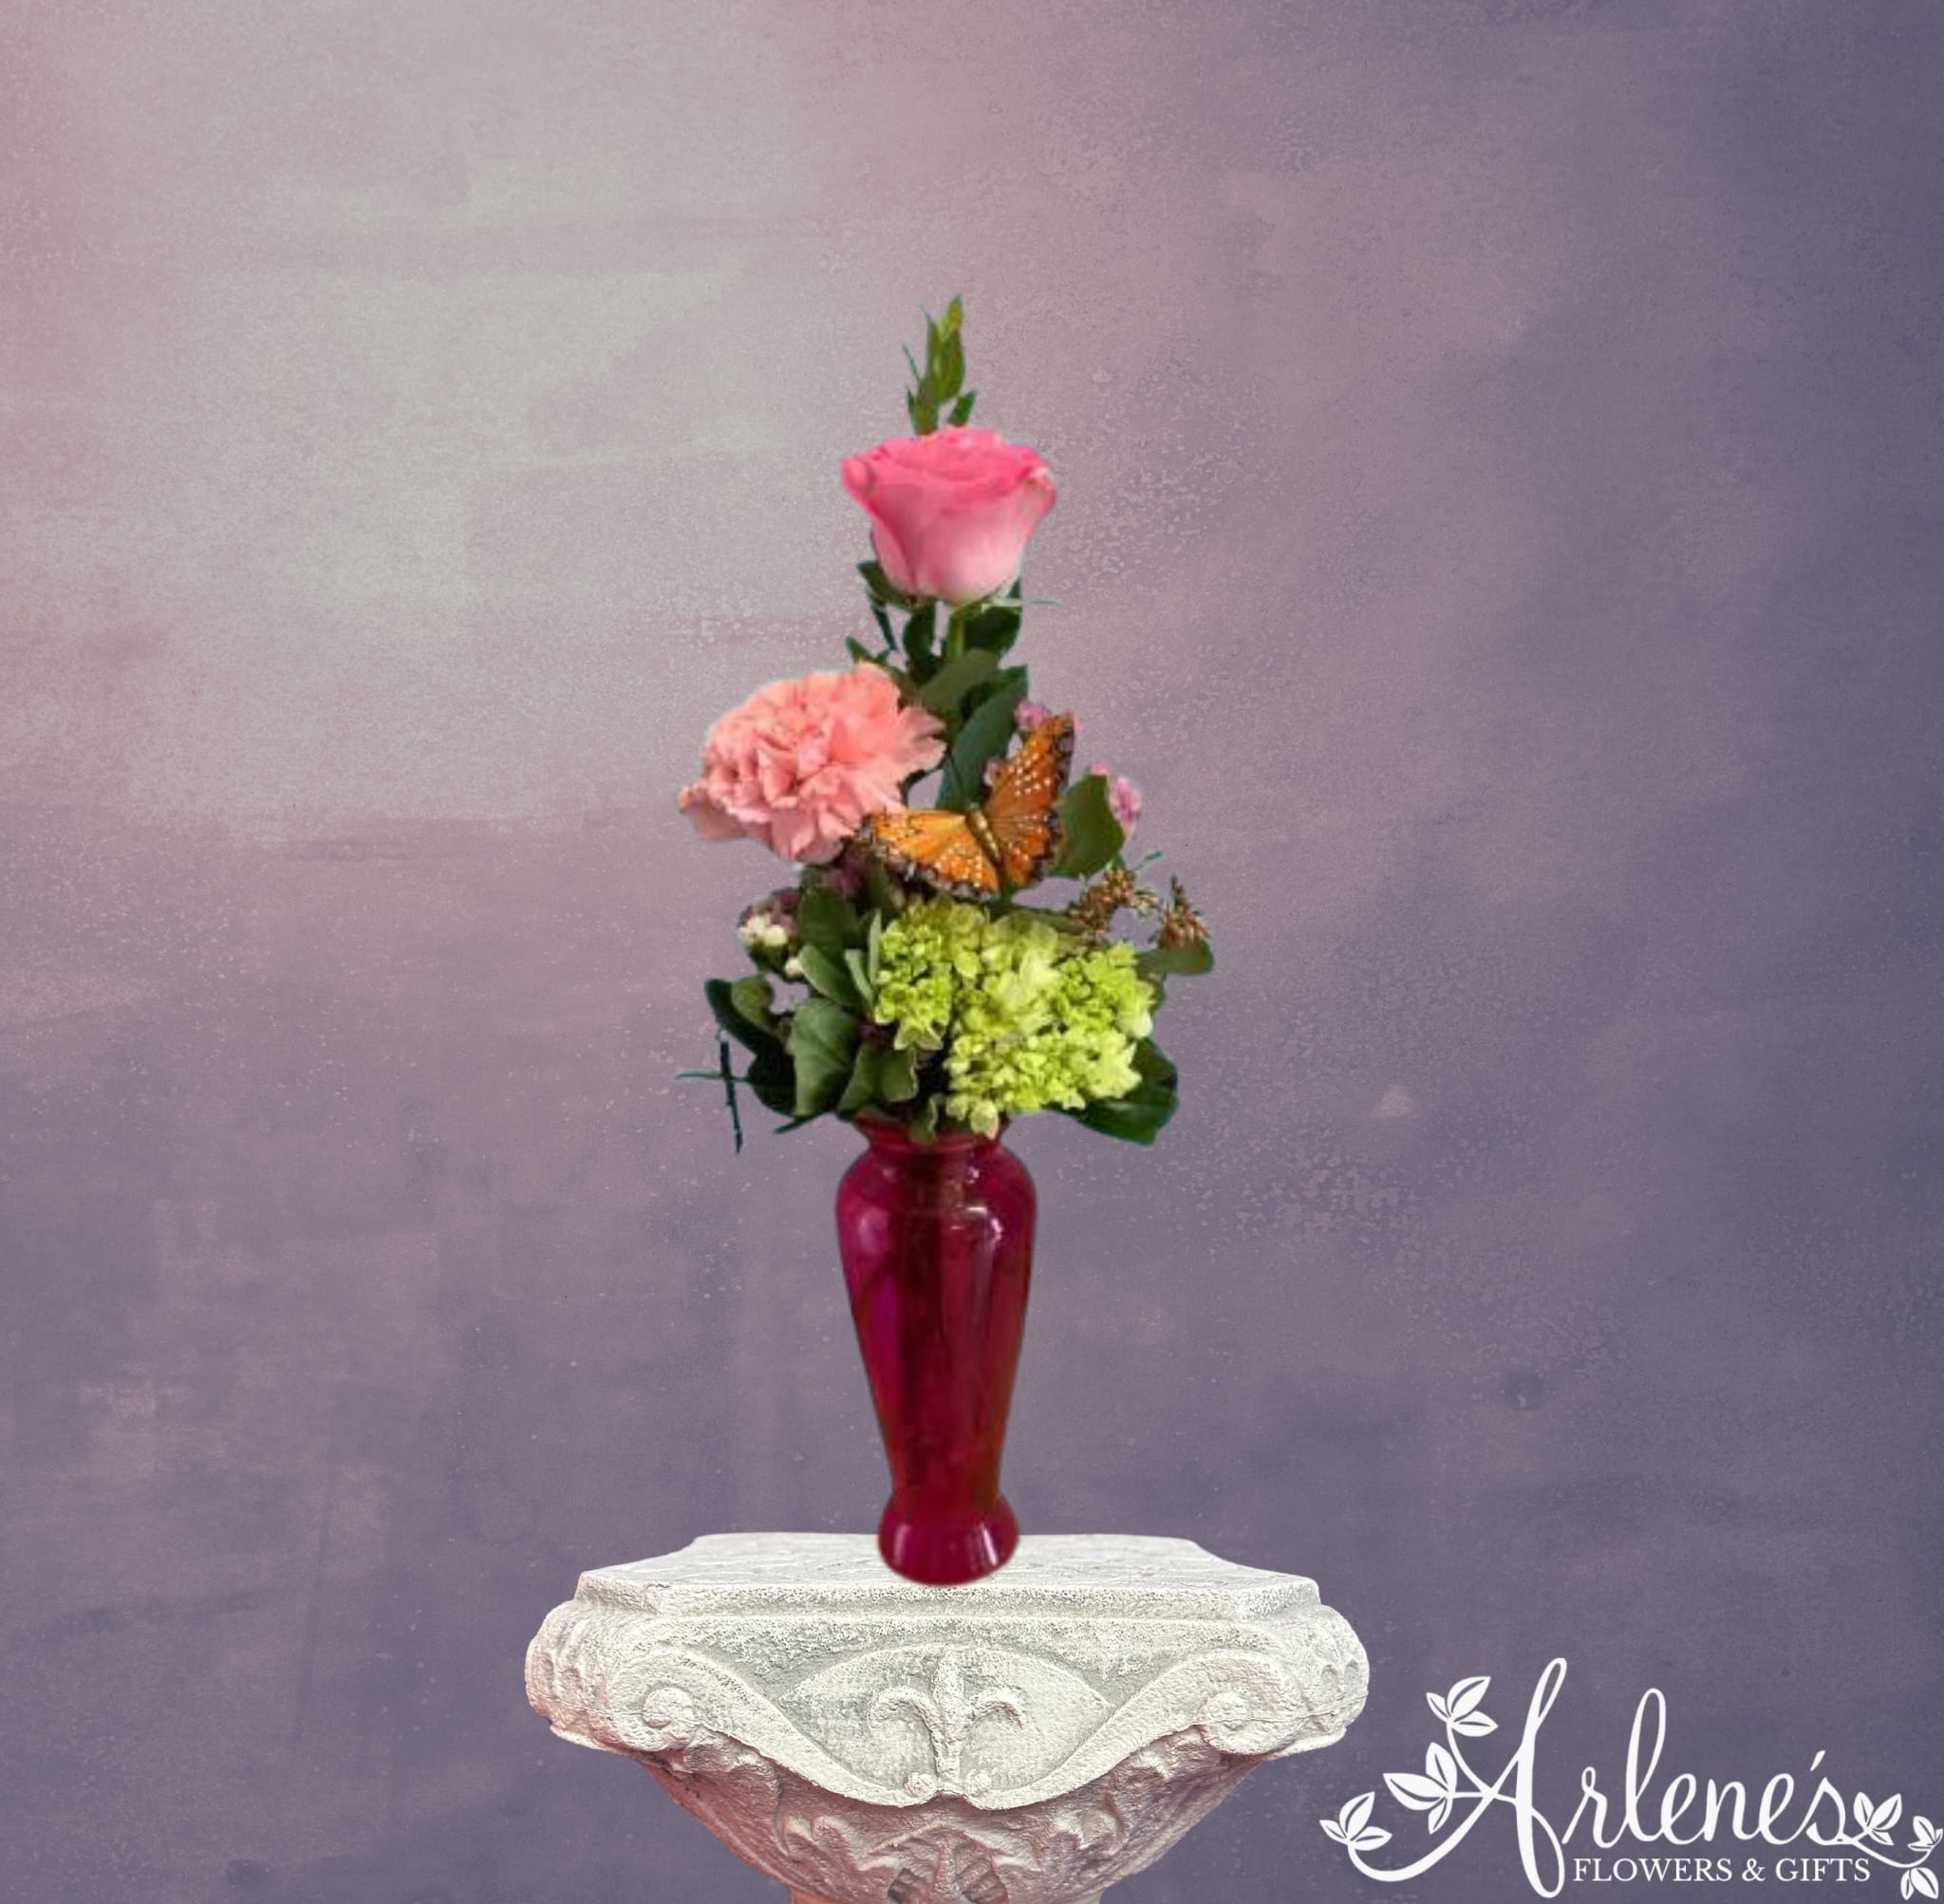 Just a Little Thank You - Red sampler vase that includes green and pink flowers with a butterfly. FLOWER COLORS MAY VARY!